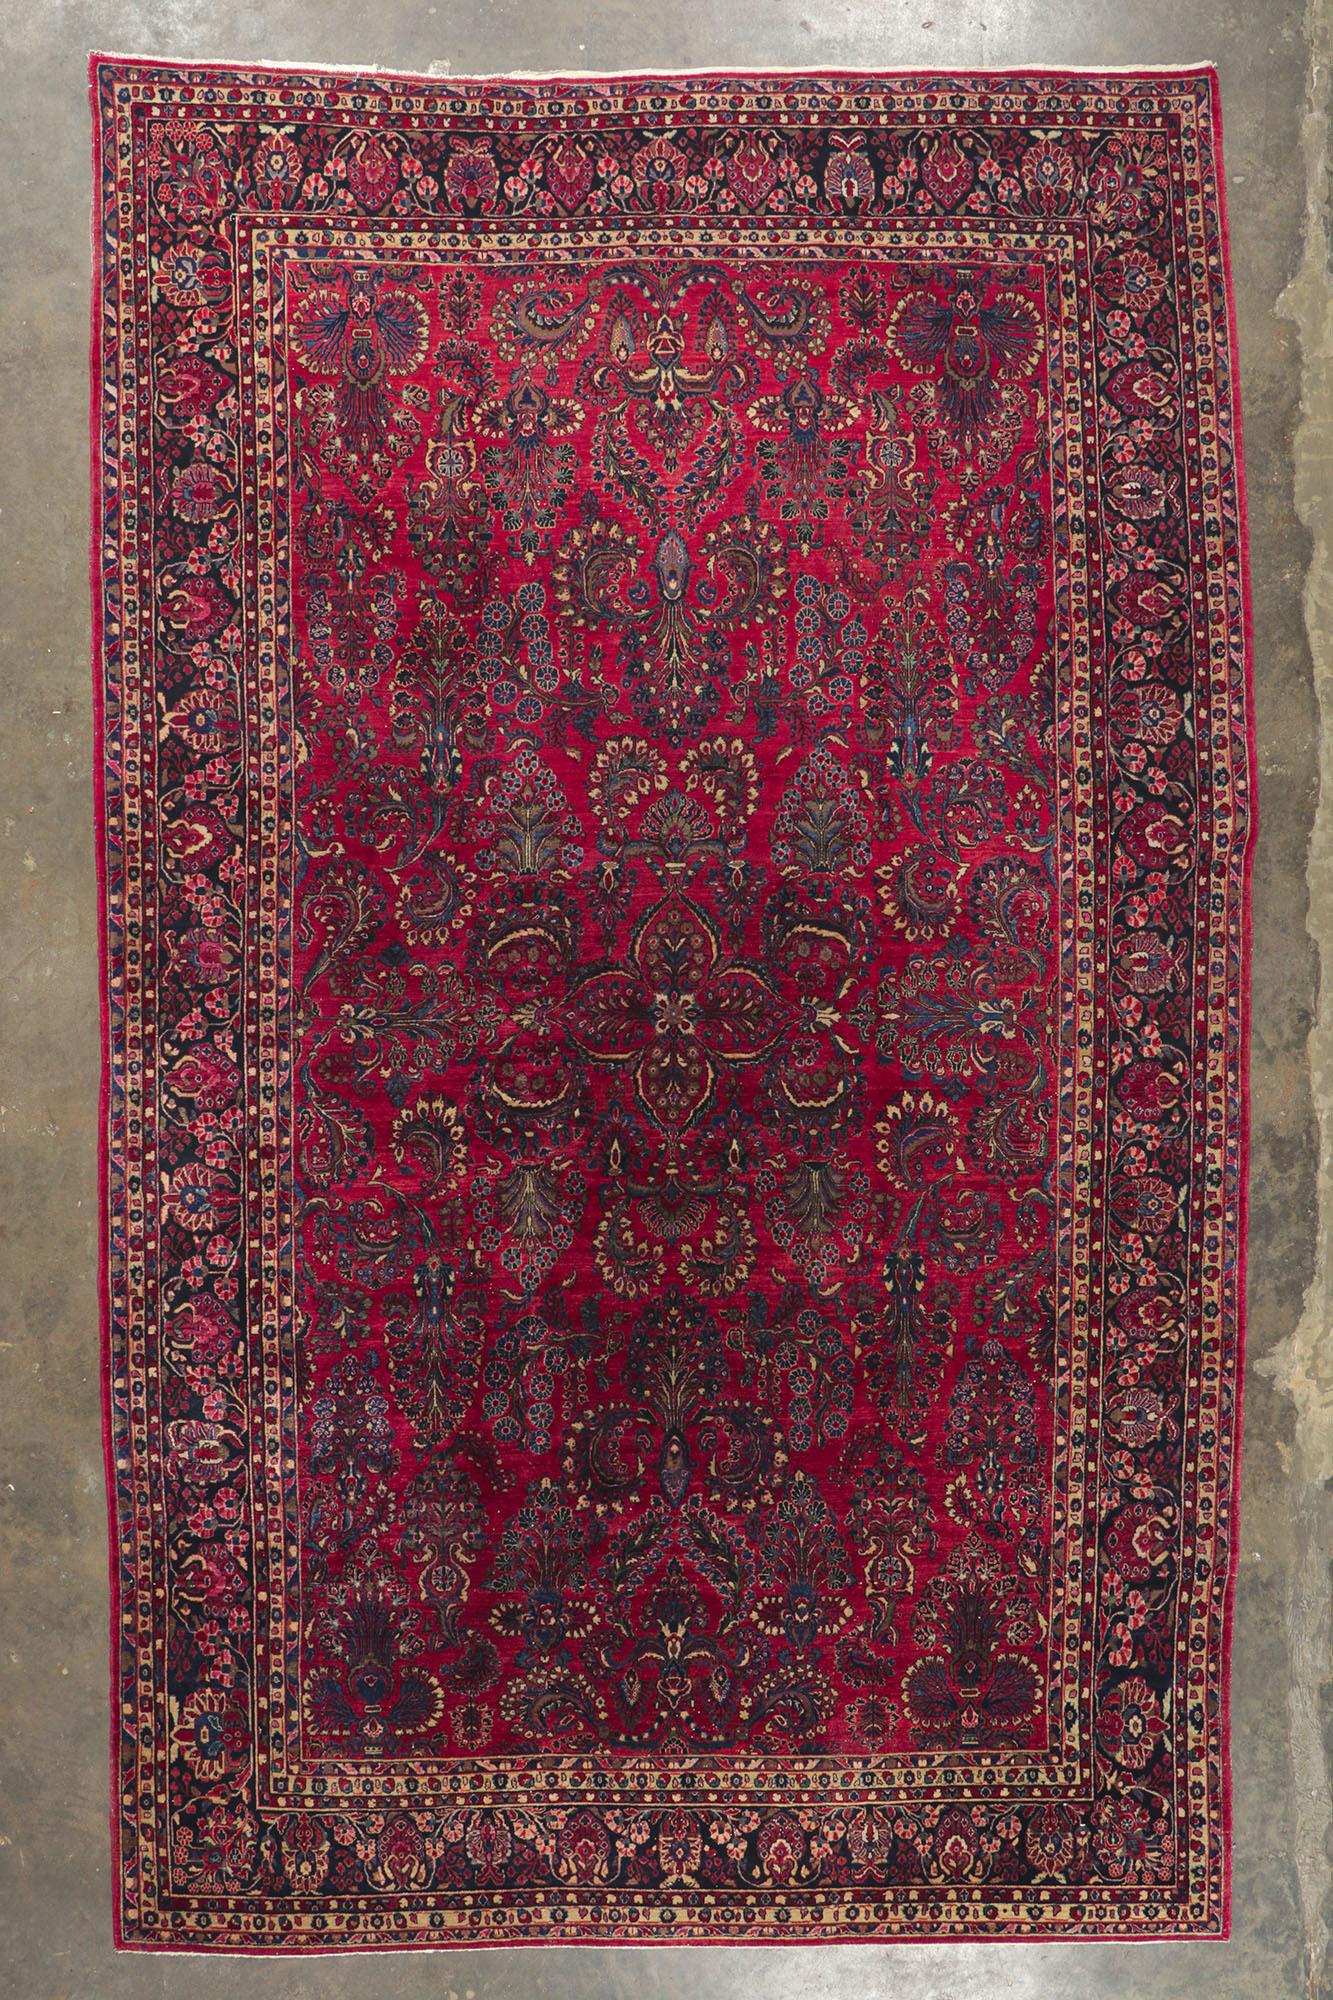 Antique Persian Sarouk Room Size Rug In Good Condition For Sale In Dallas, TX